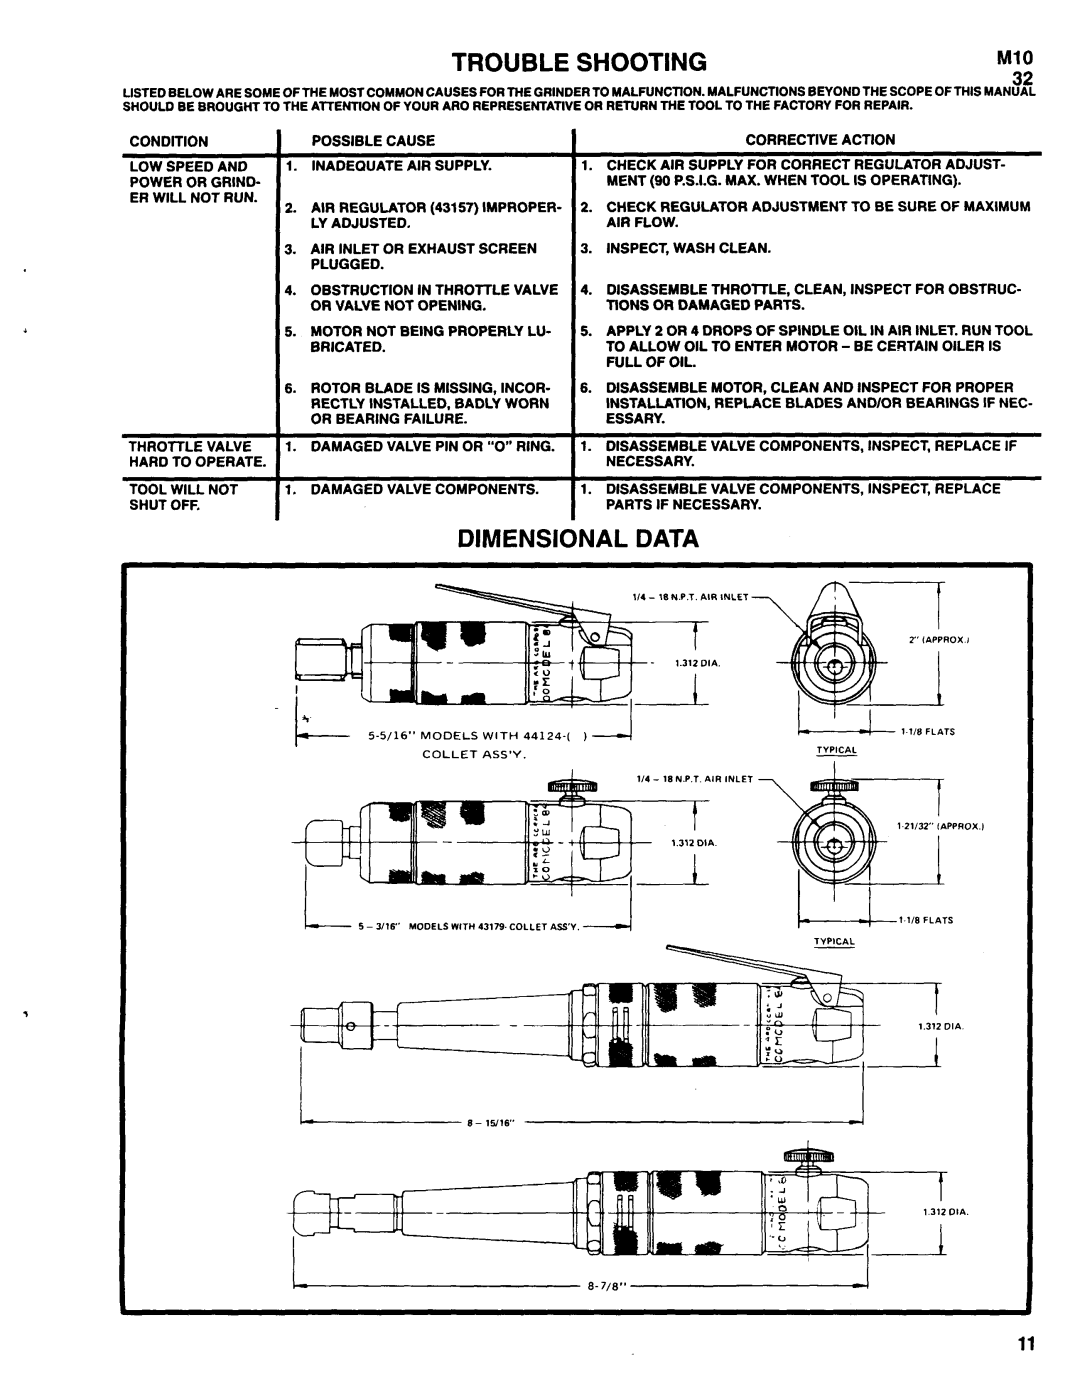 Ingersoll-Rand 8476-A1, 8478-A1, 8475-A-( ), 8475-A1, 8477-A1 manual Trouble Shooting, Dimensional Data 